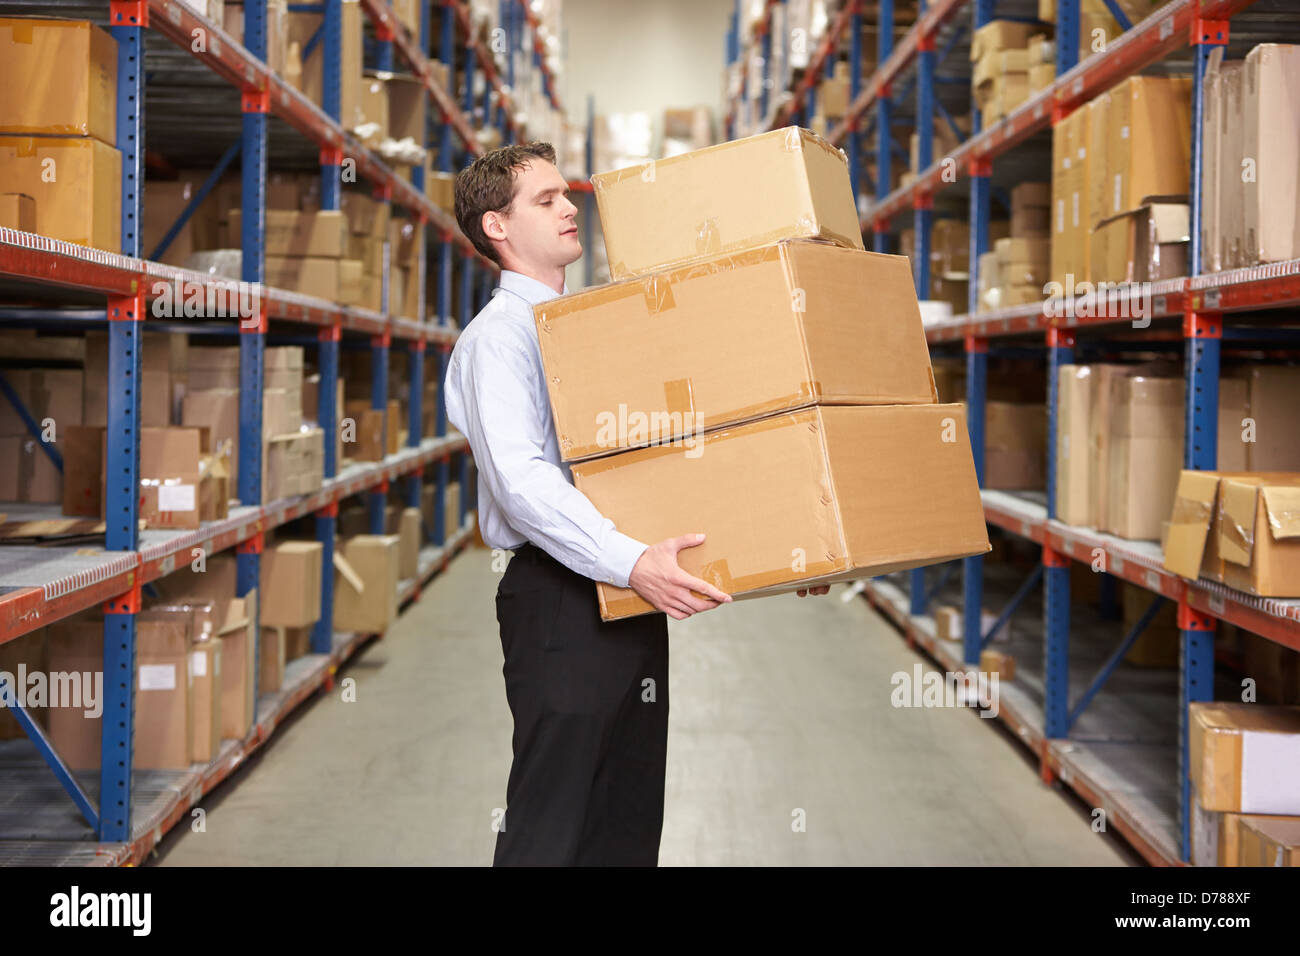 Man Carrying Boxes In Warehouse Banque D'Images